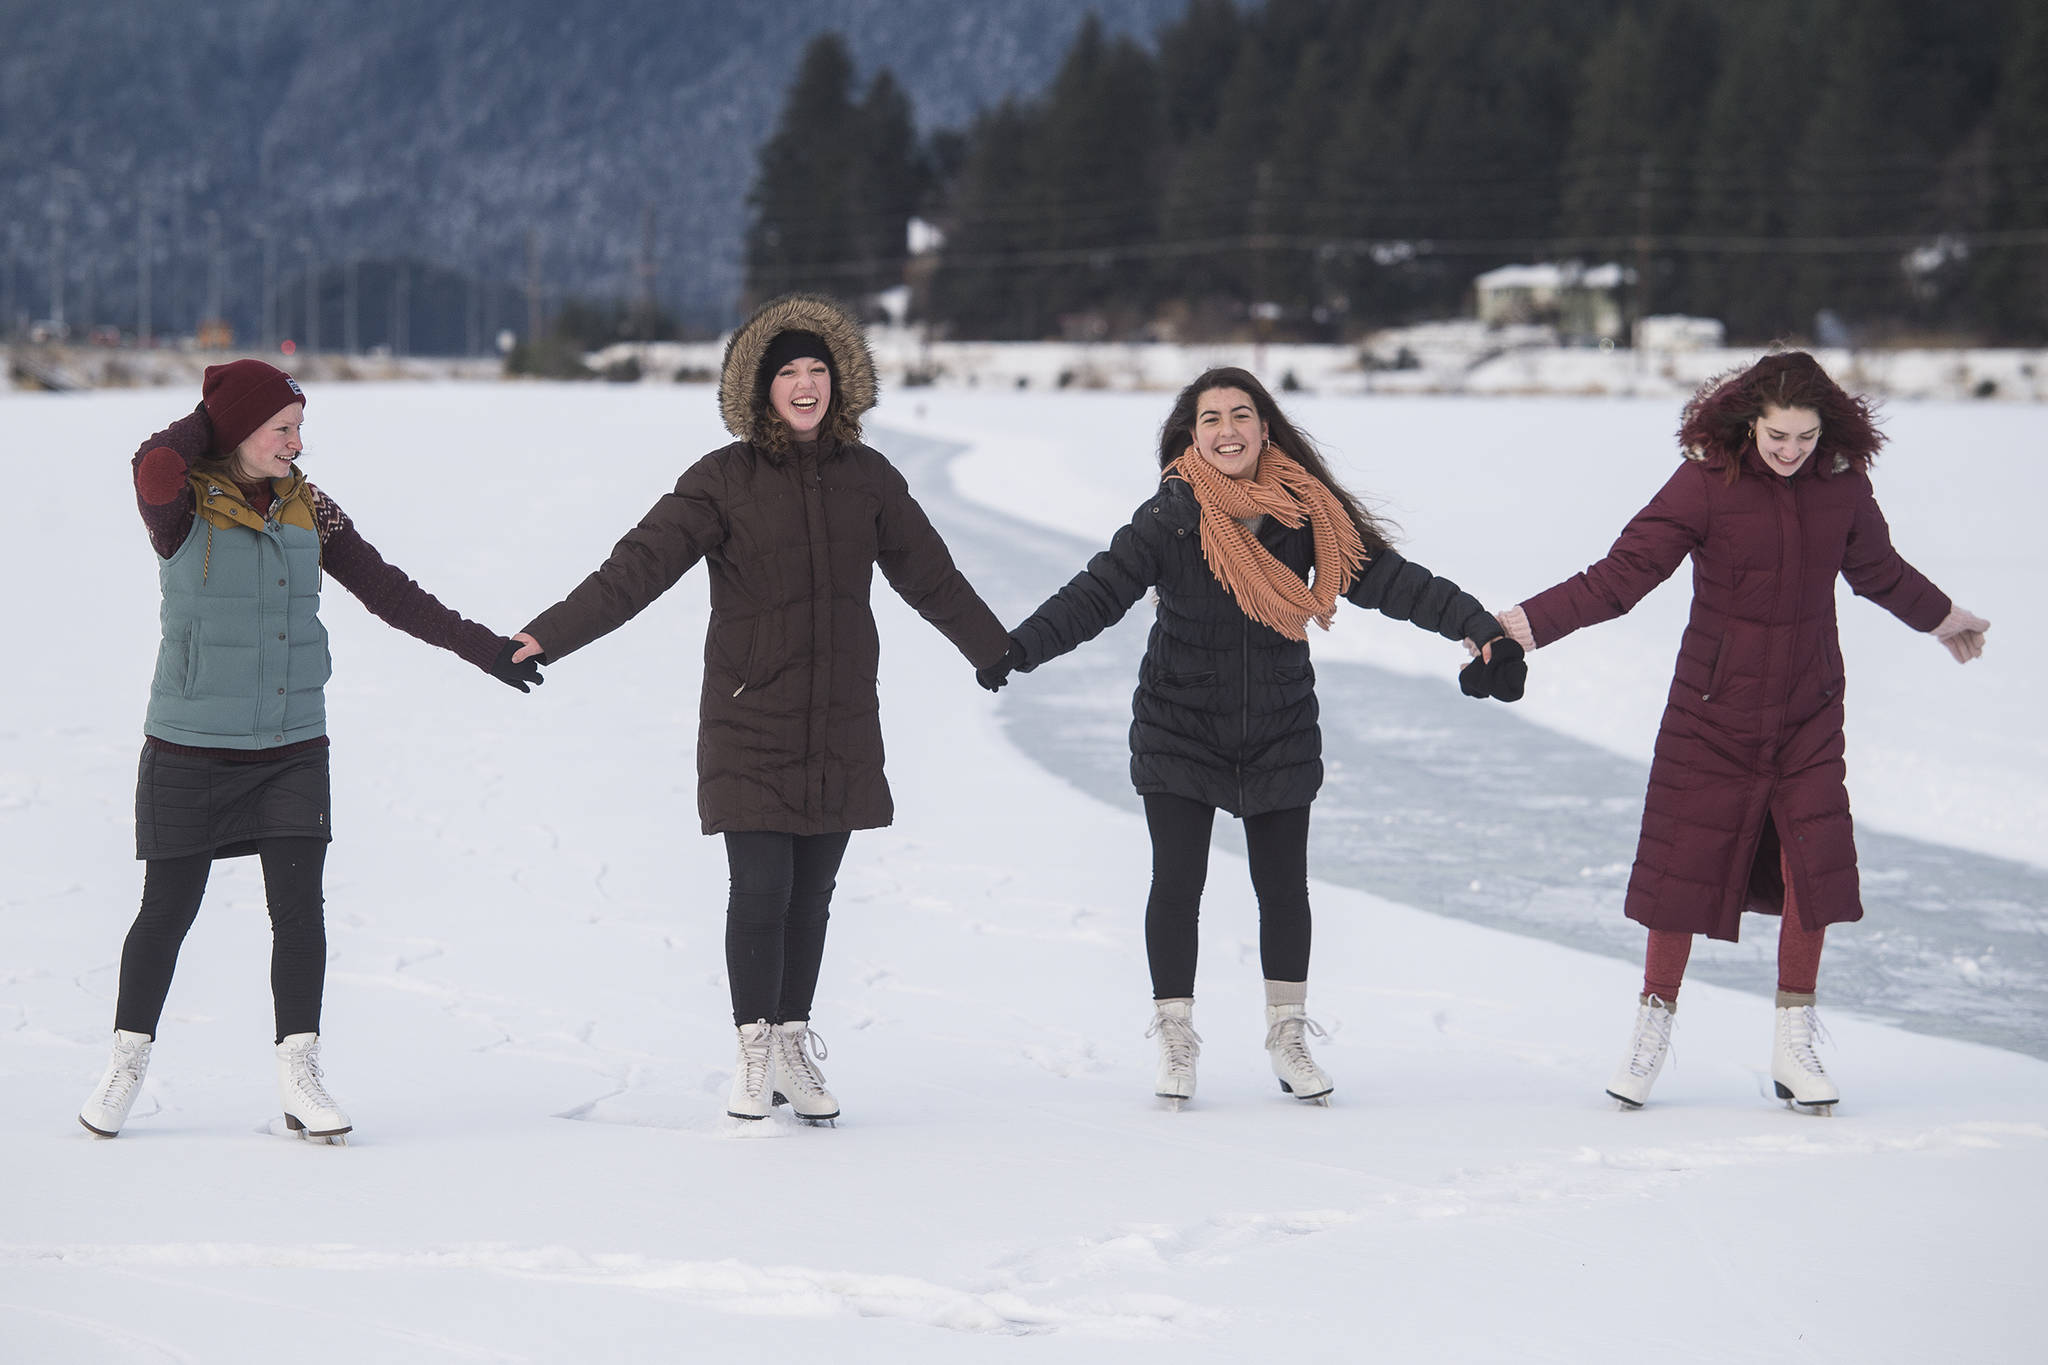 Elizabeth Ramseth, left, Bethany Bibb, Maria Jsustartari and Lydia Smith, right, take time out during the lunch hour to skate at Twin Lakes on Wednesday, Jan. 8, 2019. (Michael Penn | Juneau Empire)